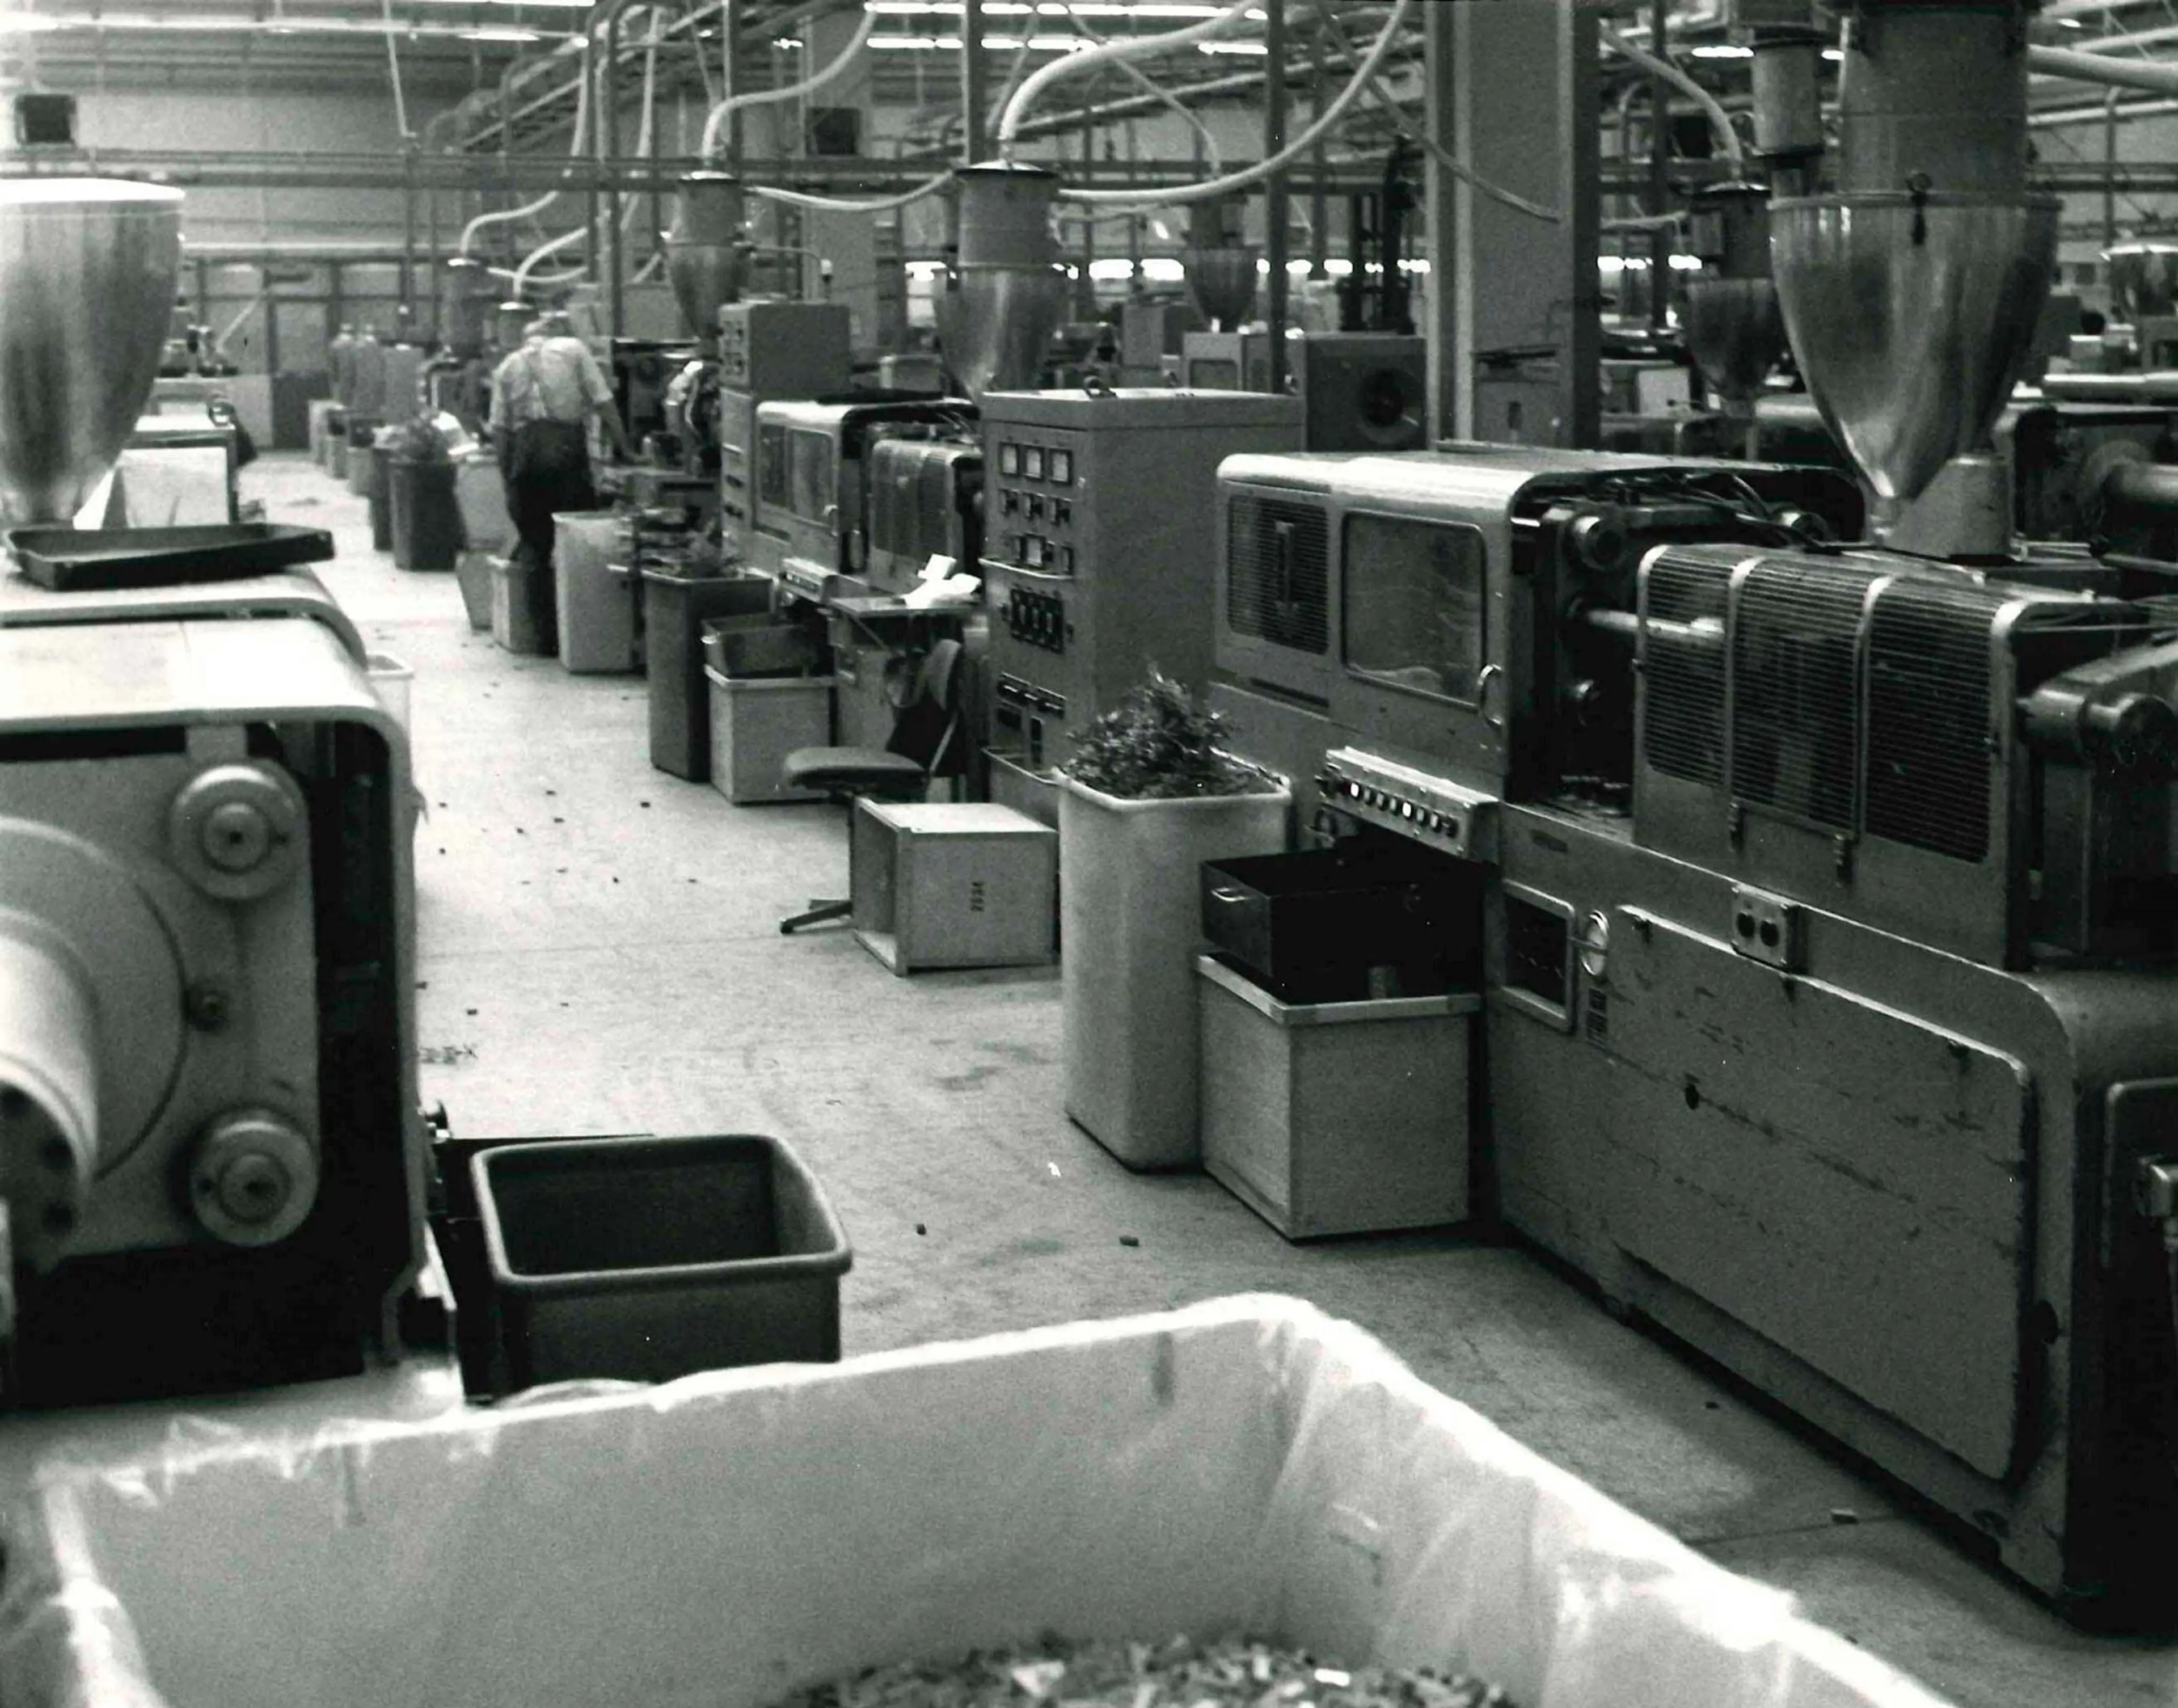 machines inside a LEGO Group factory in the 1970s